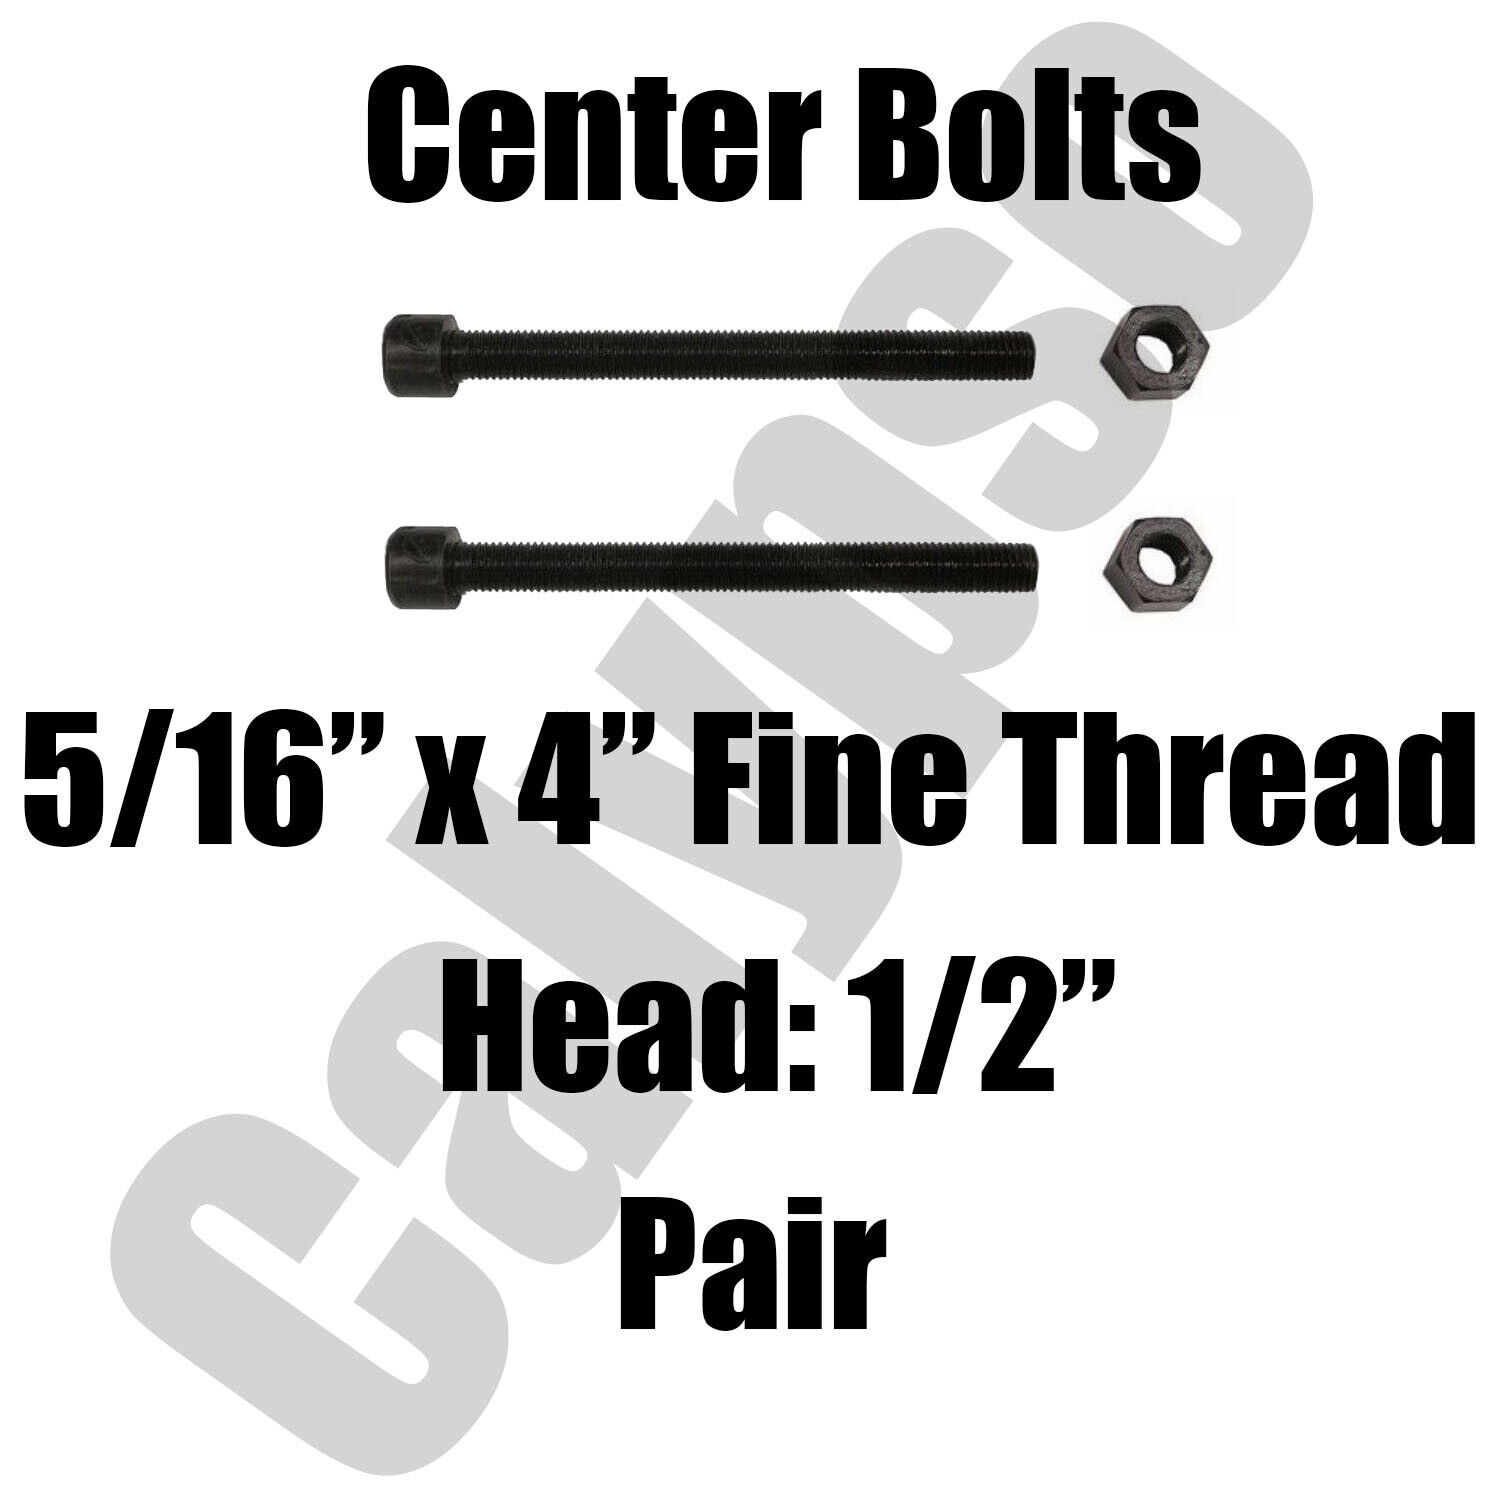 Leaf Spring Center Bolt - 5/16 x 4 (PAIR) Fine Threaded Leaf Bolts with Nuts